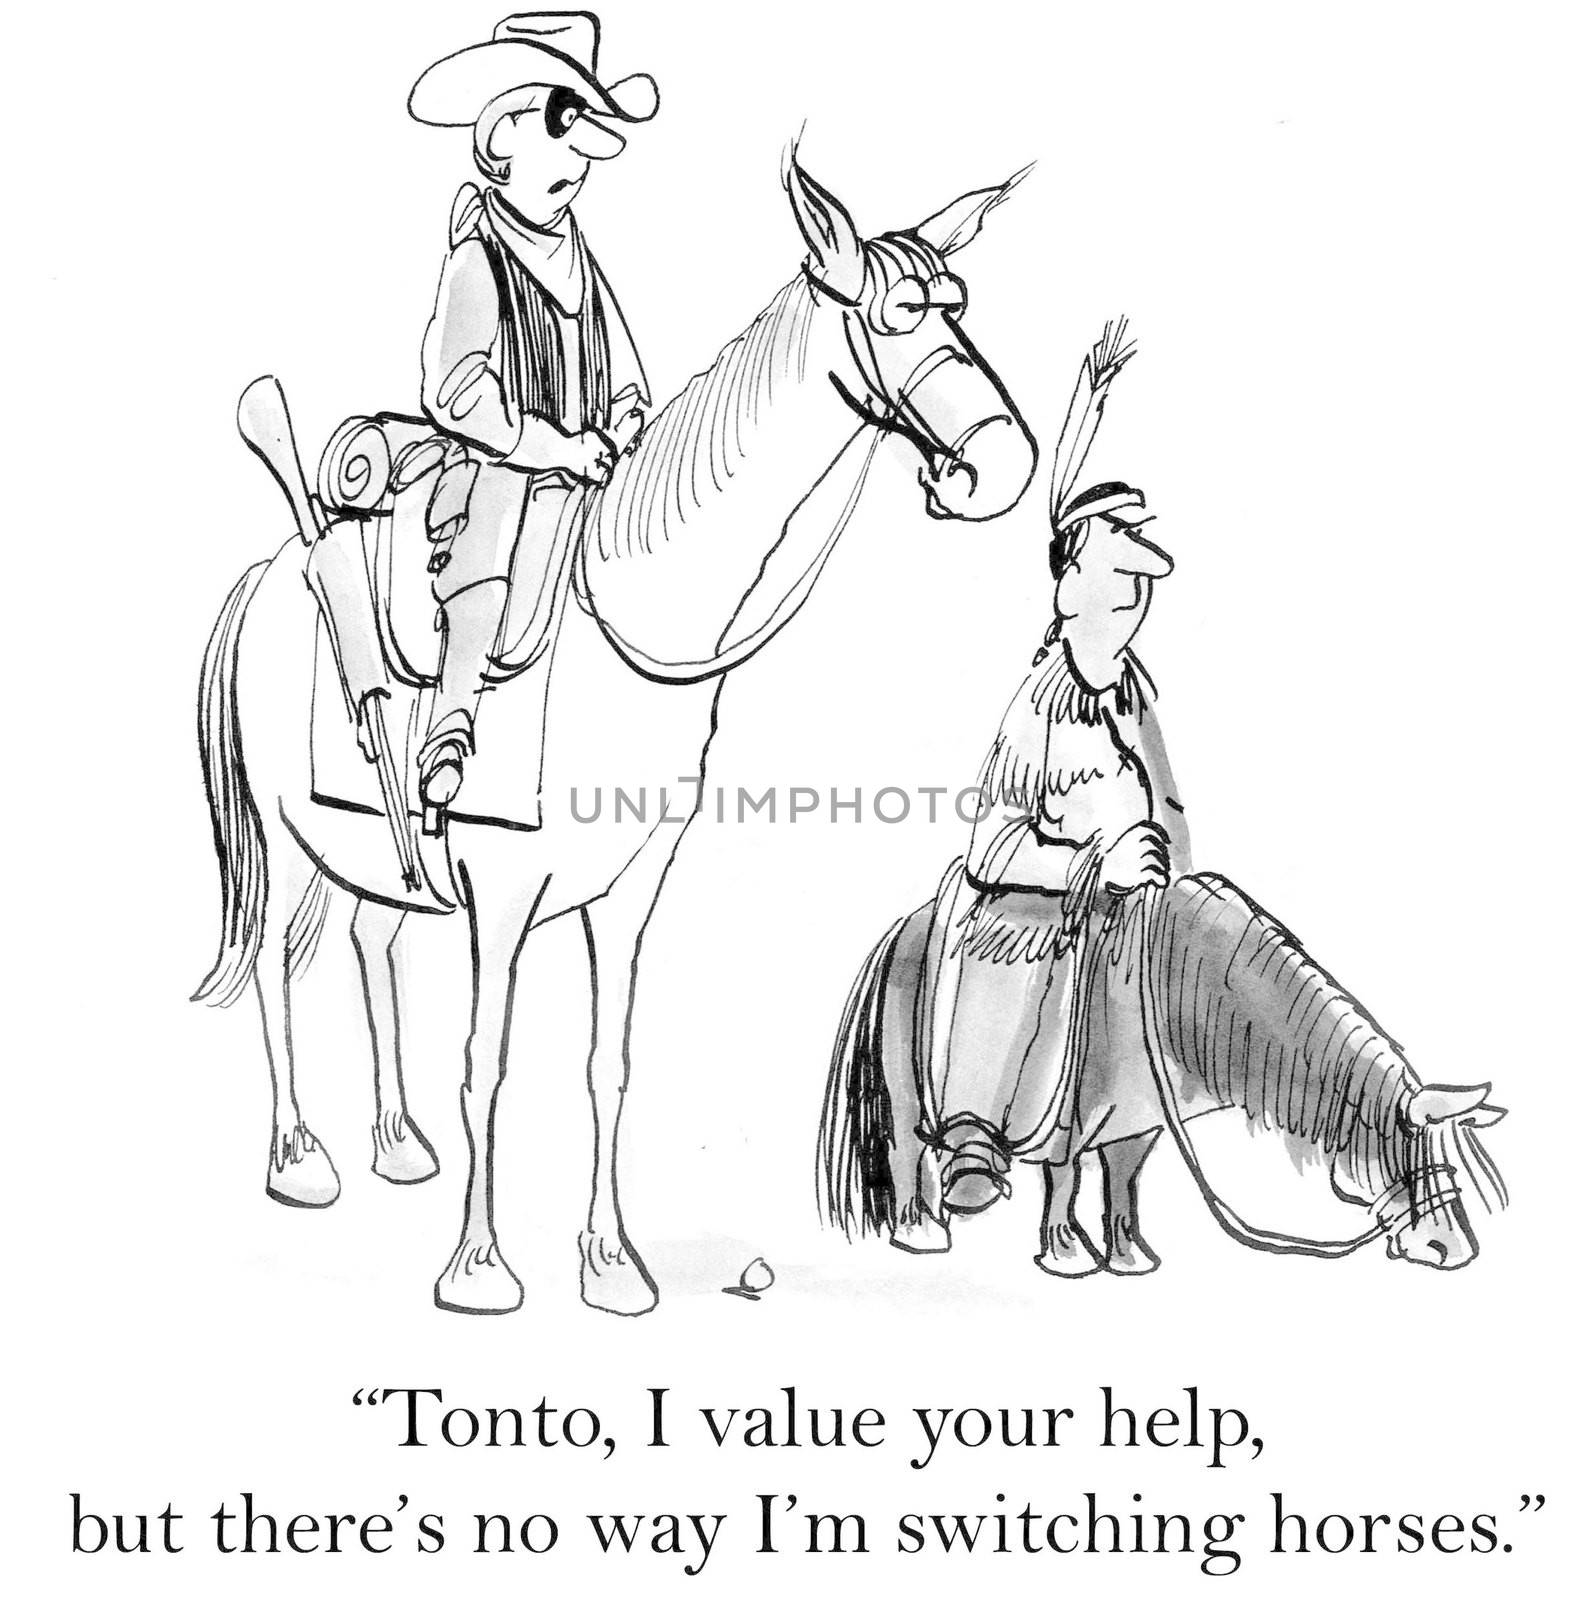 "Tonto I value your help but there's no way I'm switching horses."